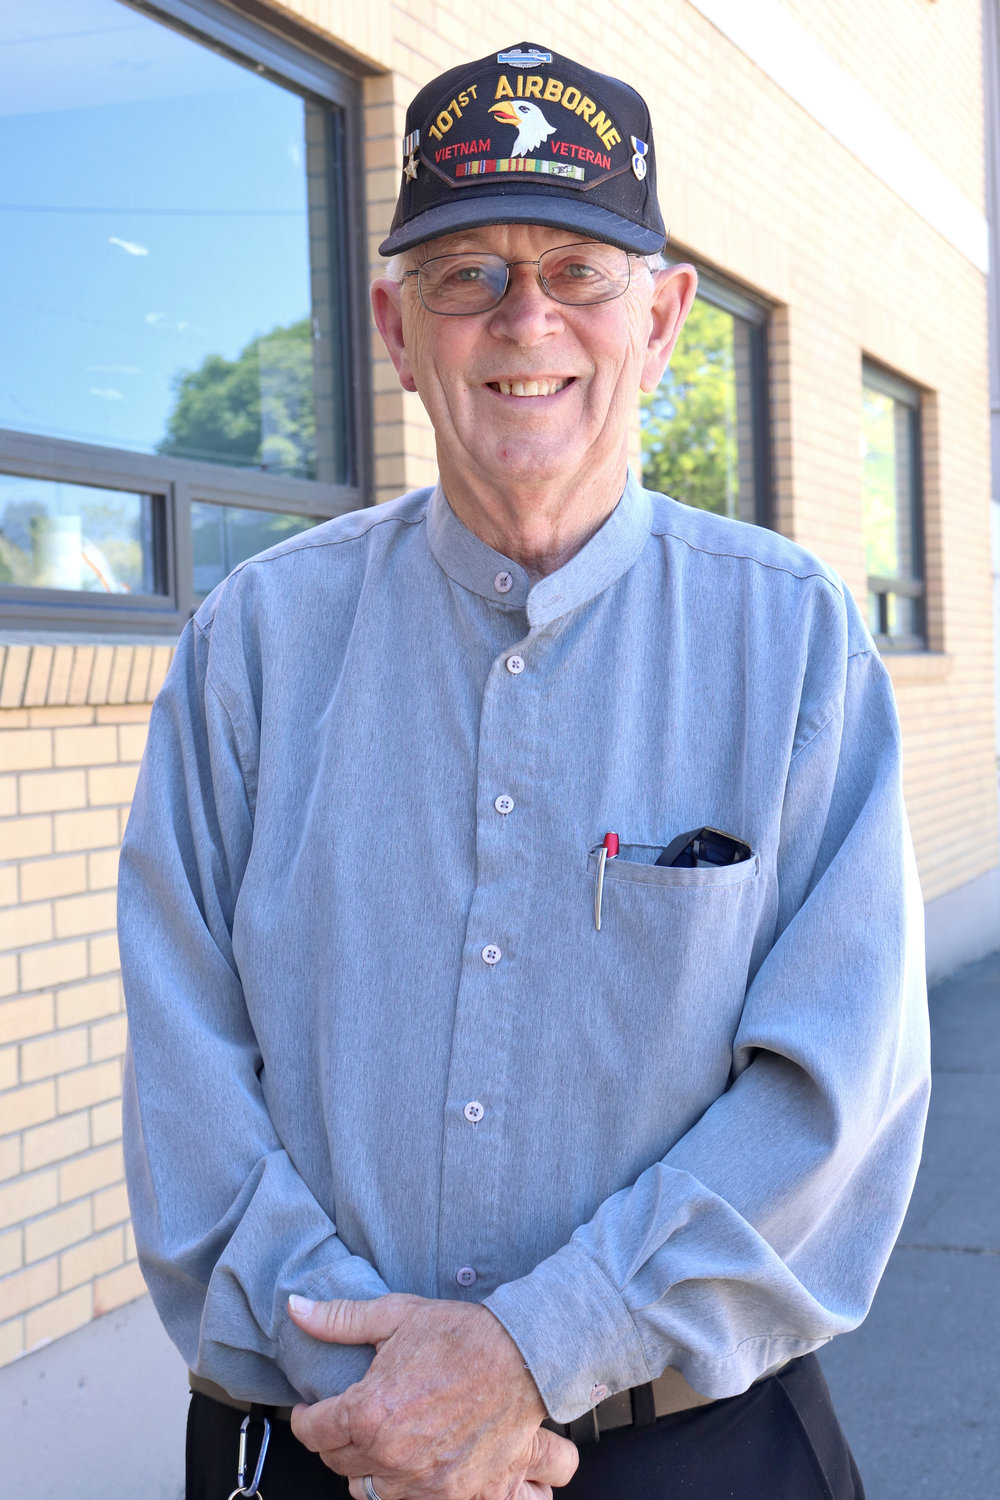 Randy Pennington poses for a photo in downtown Centralia on Tuesday. He retired from the Toledo Police Department on July 5 after 36 years with the department as a reserve officer.